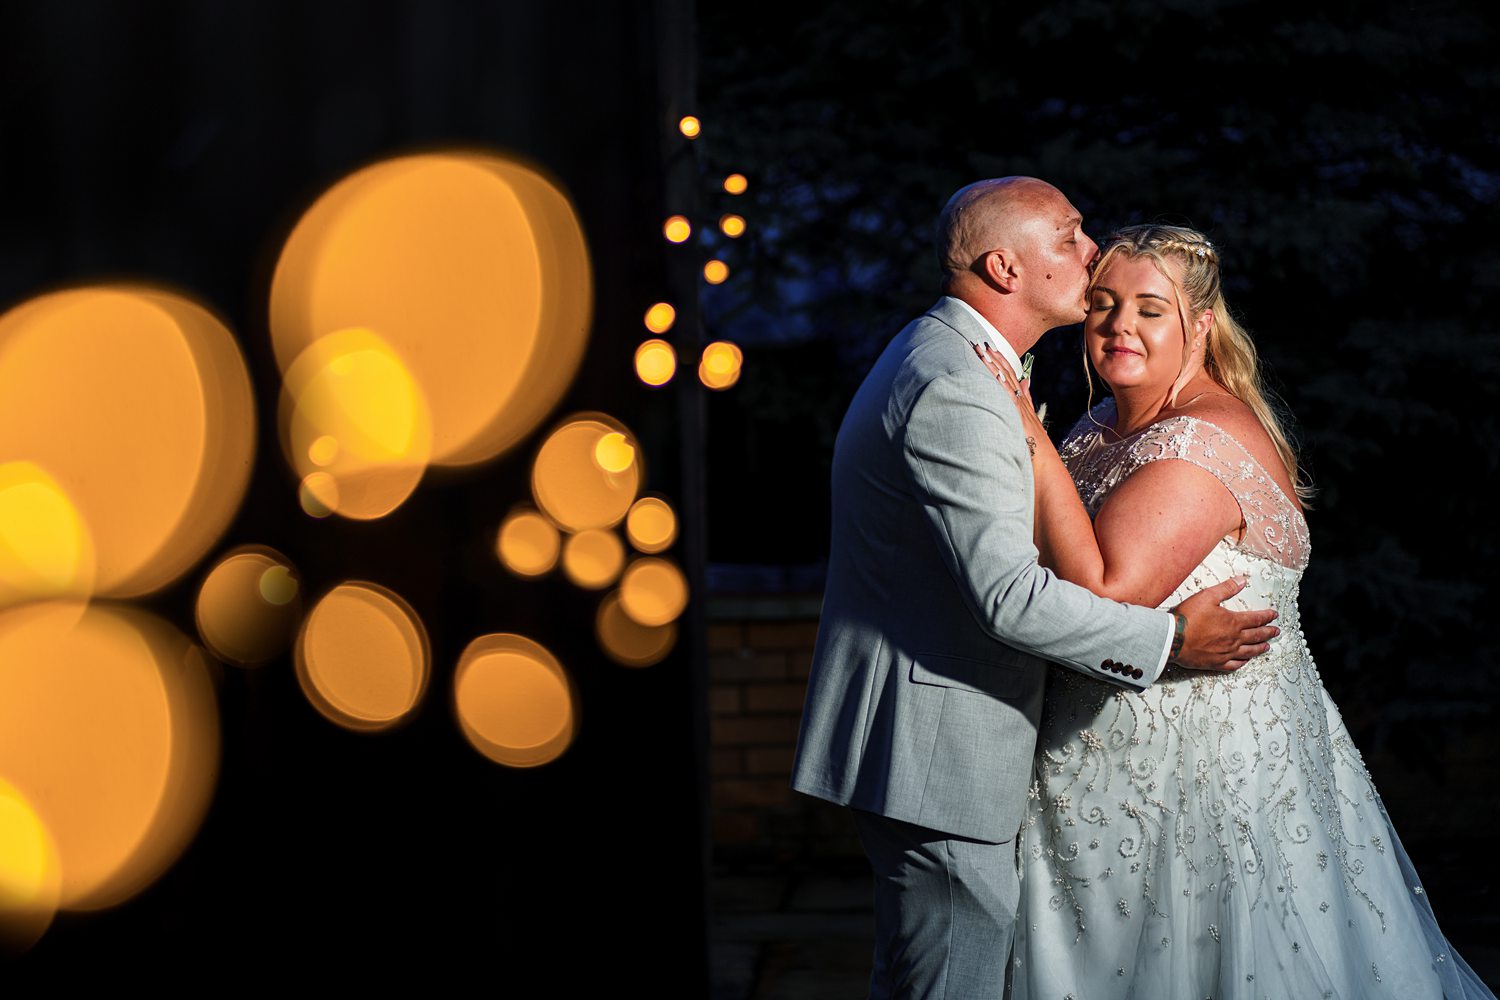 Couple embracing at night with warm bokeh lights.